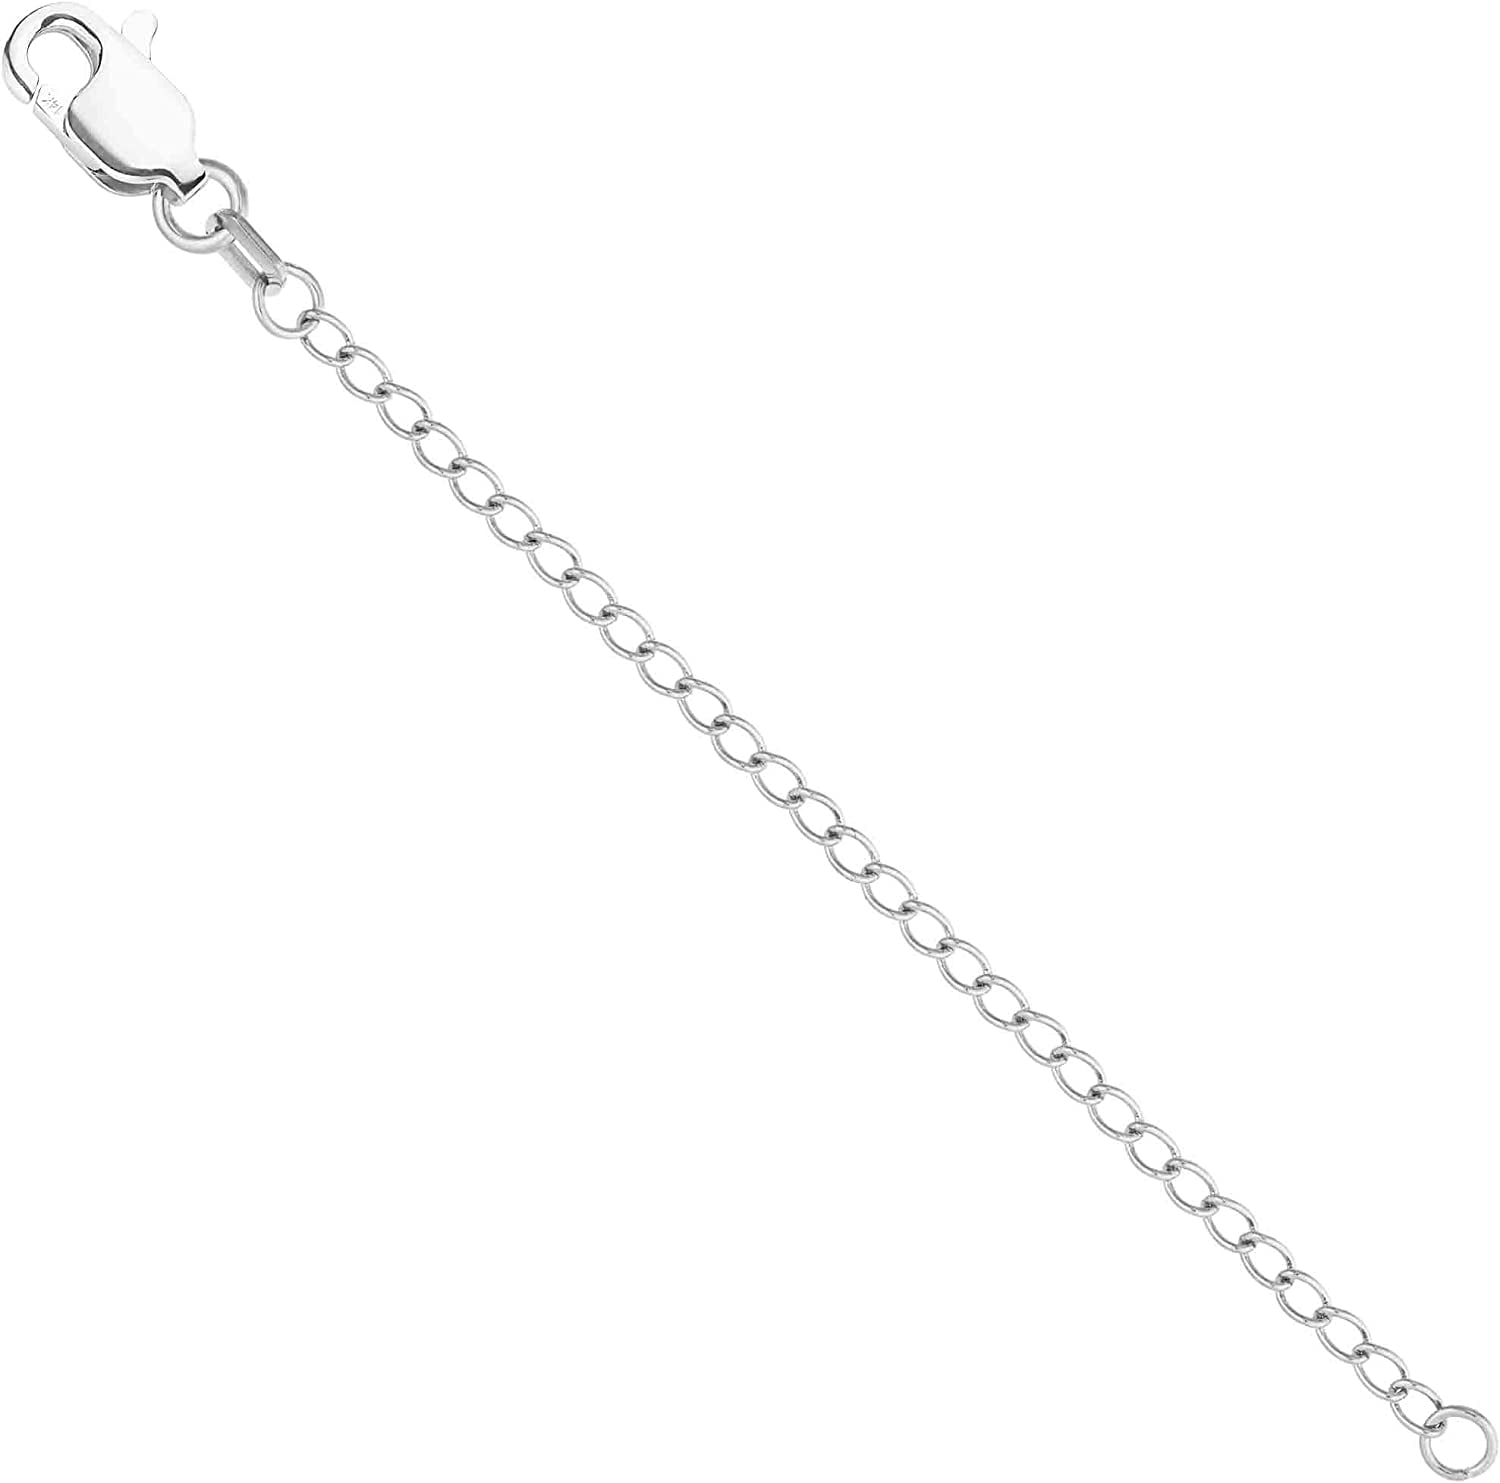 Krendr 10 Pcs Necklace Extender Chains, 100% Stainless Steel